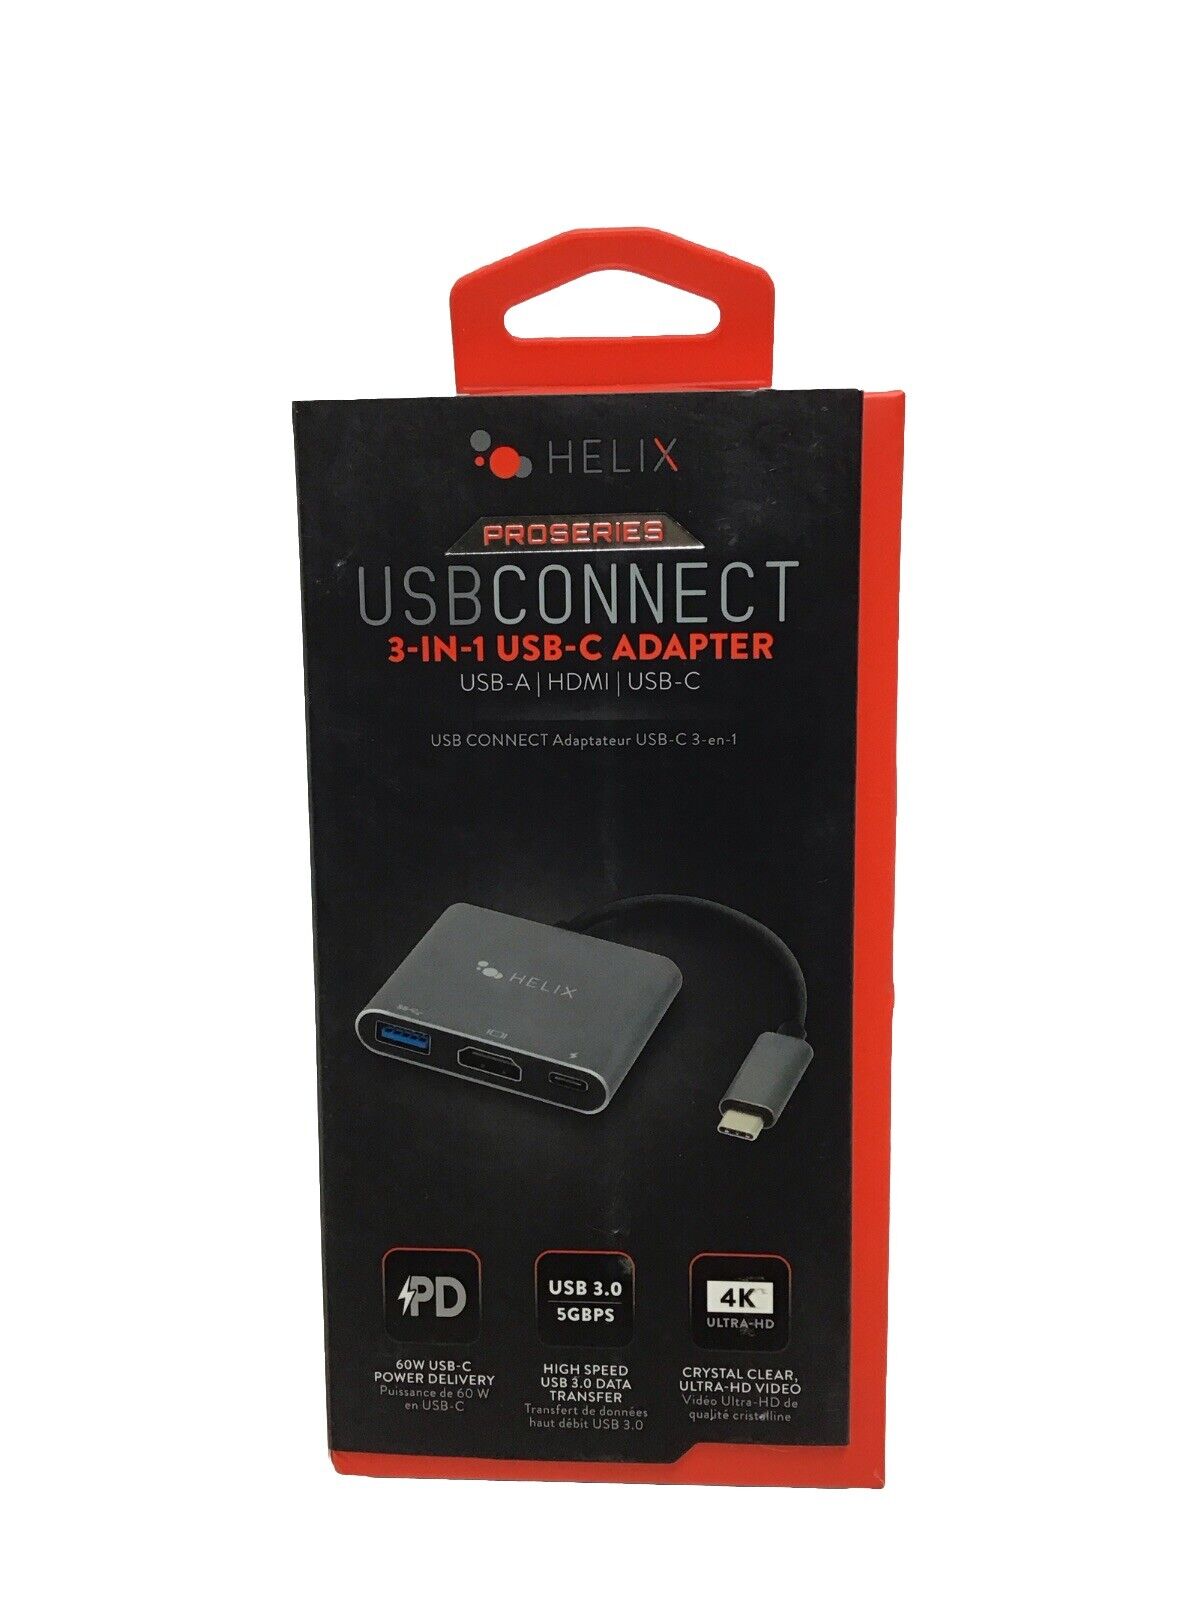 Helix Proseries 3-In-1 USB Connect Adapter